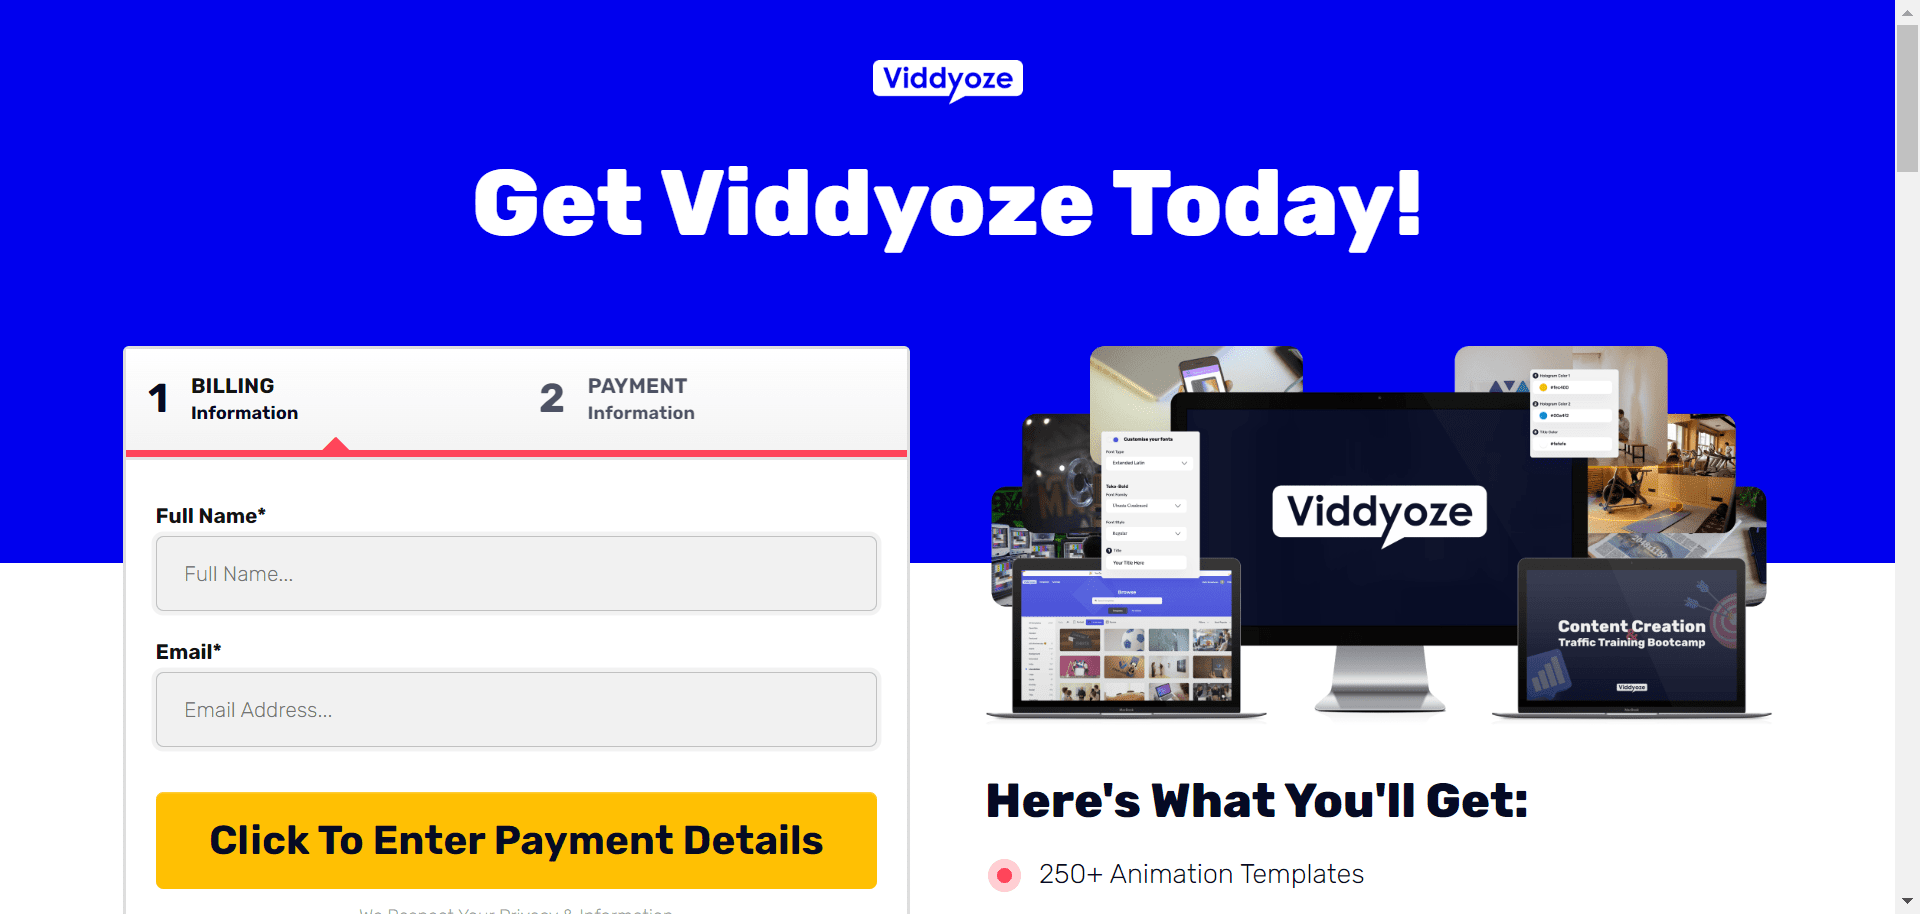 Is there a free trial of Viddyoze